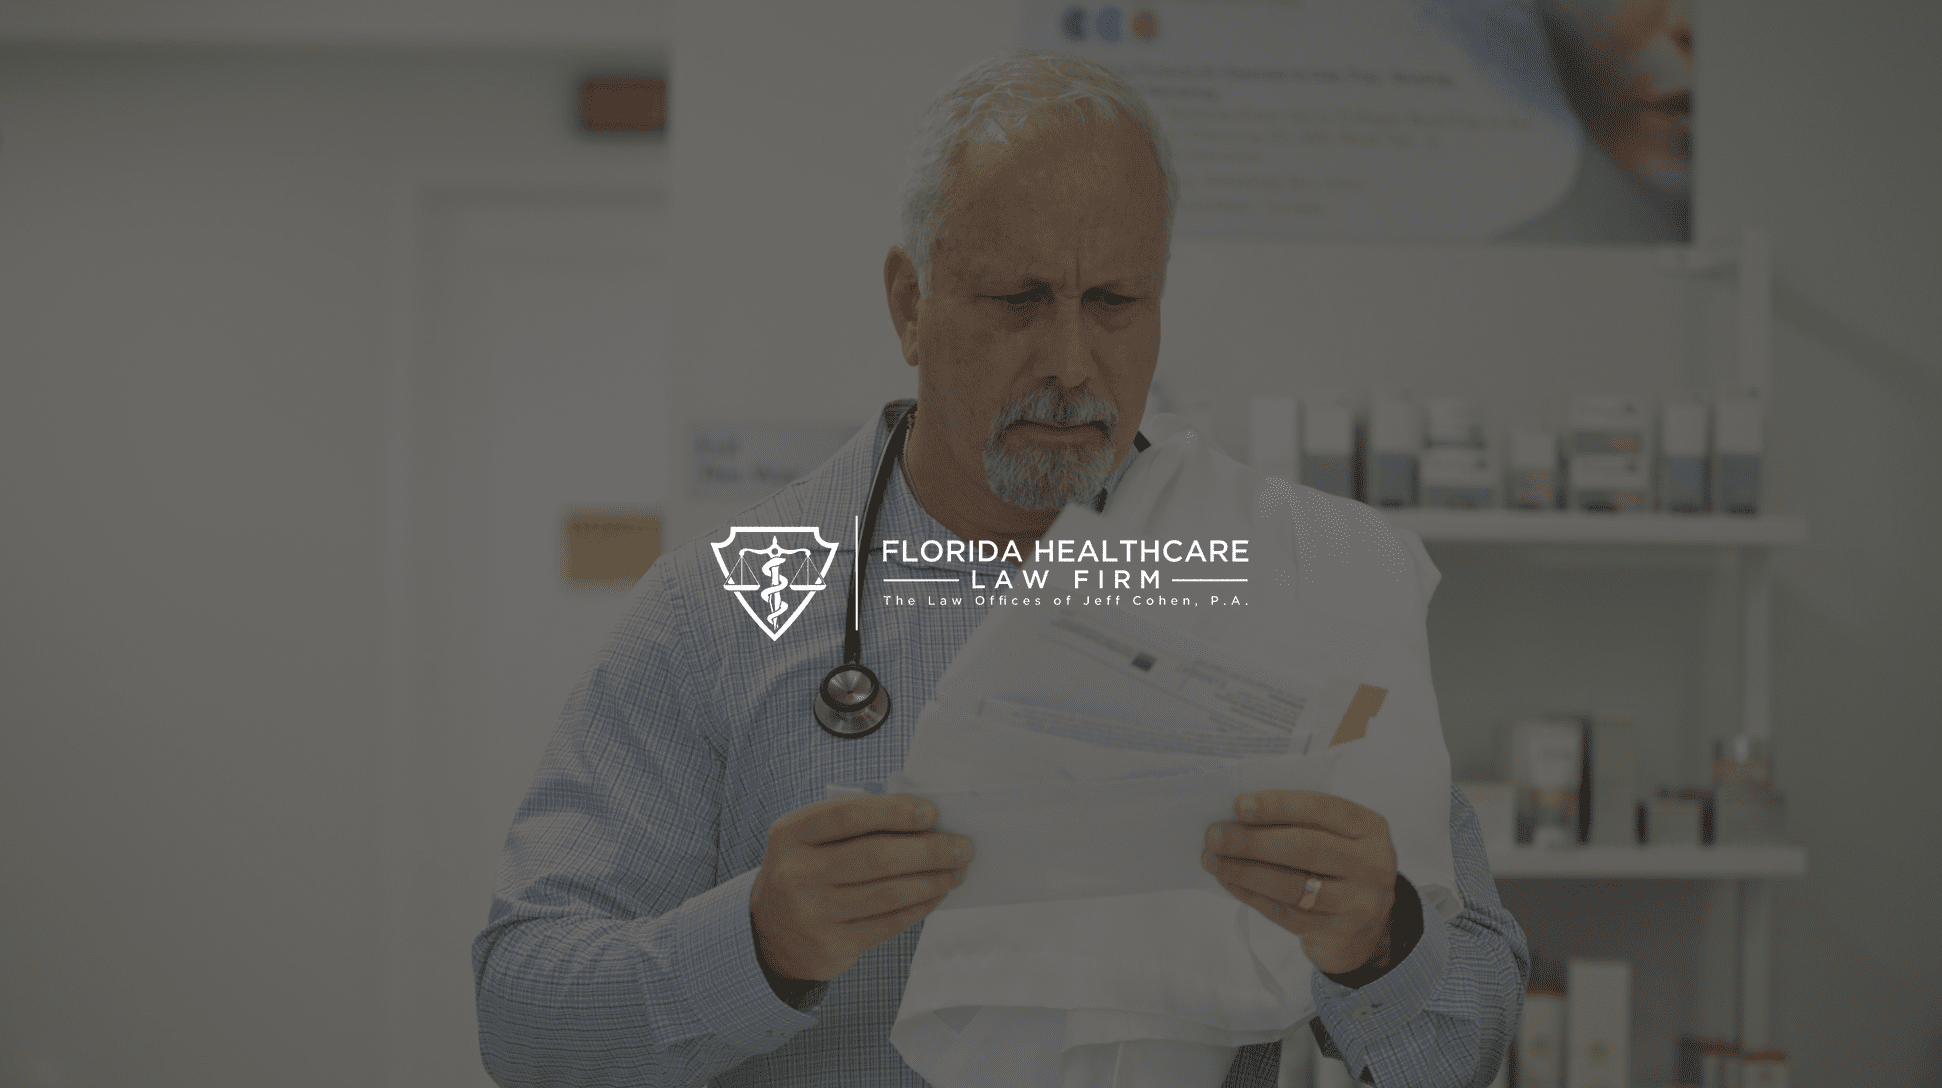 White Florida Healthcare The Law Offices of Jeff Cohen, P.A. Logo with a background of a doctor looking at papers